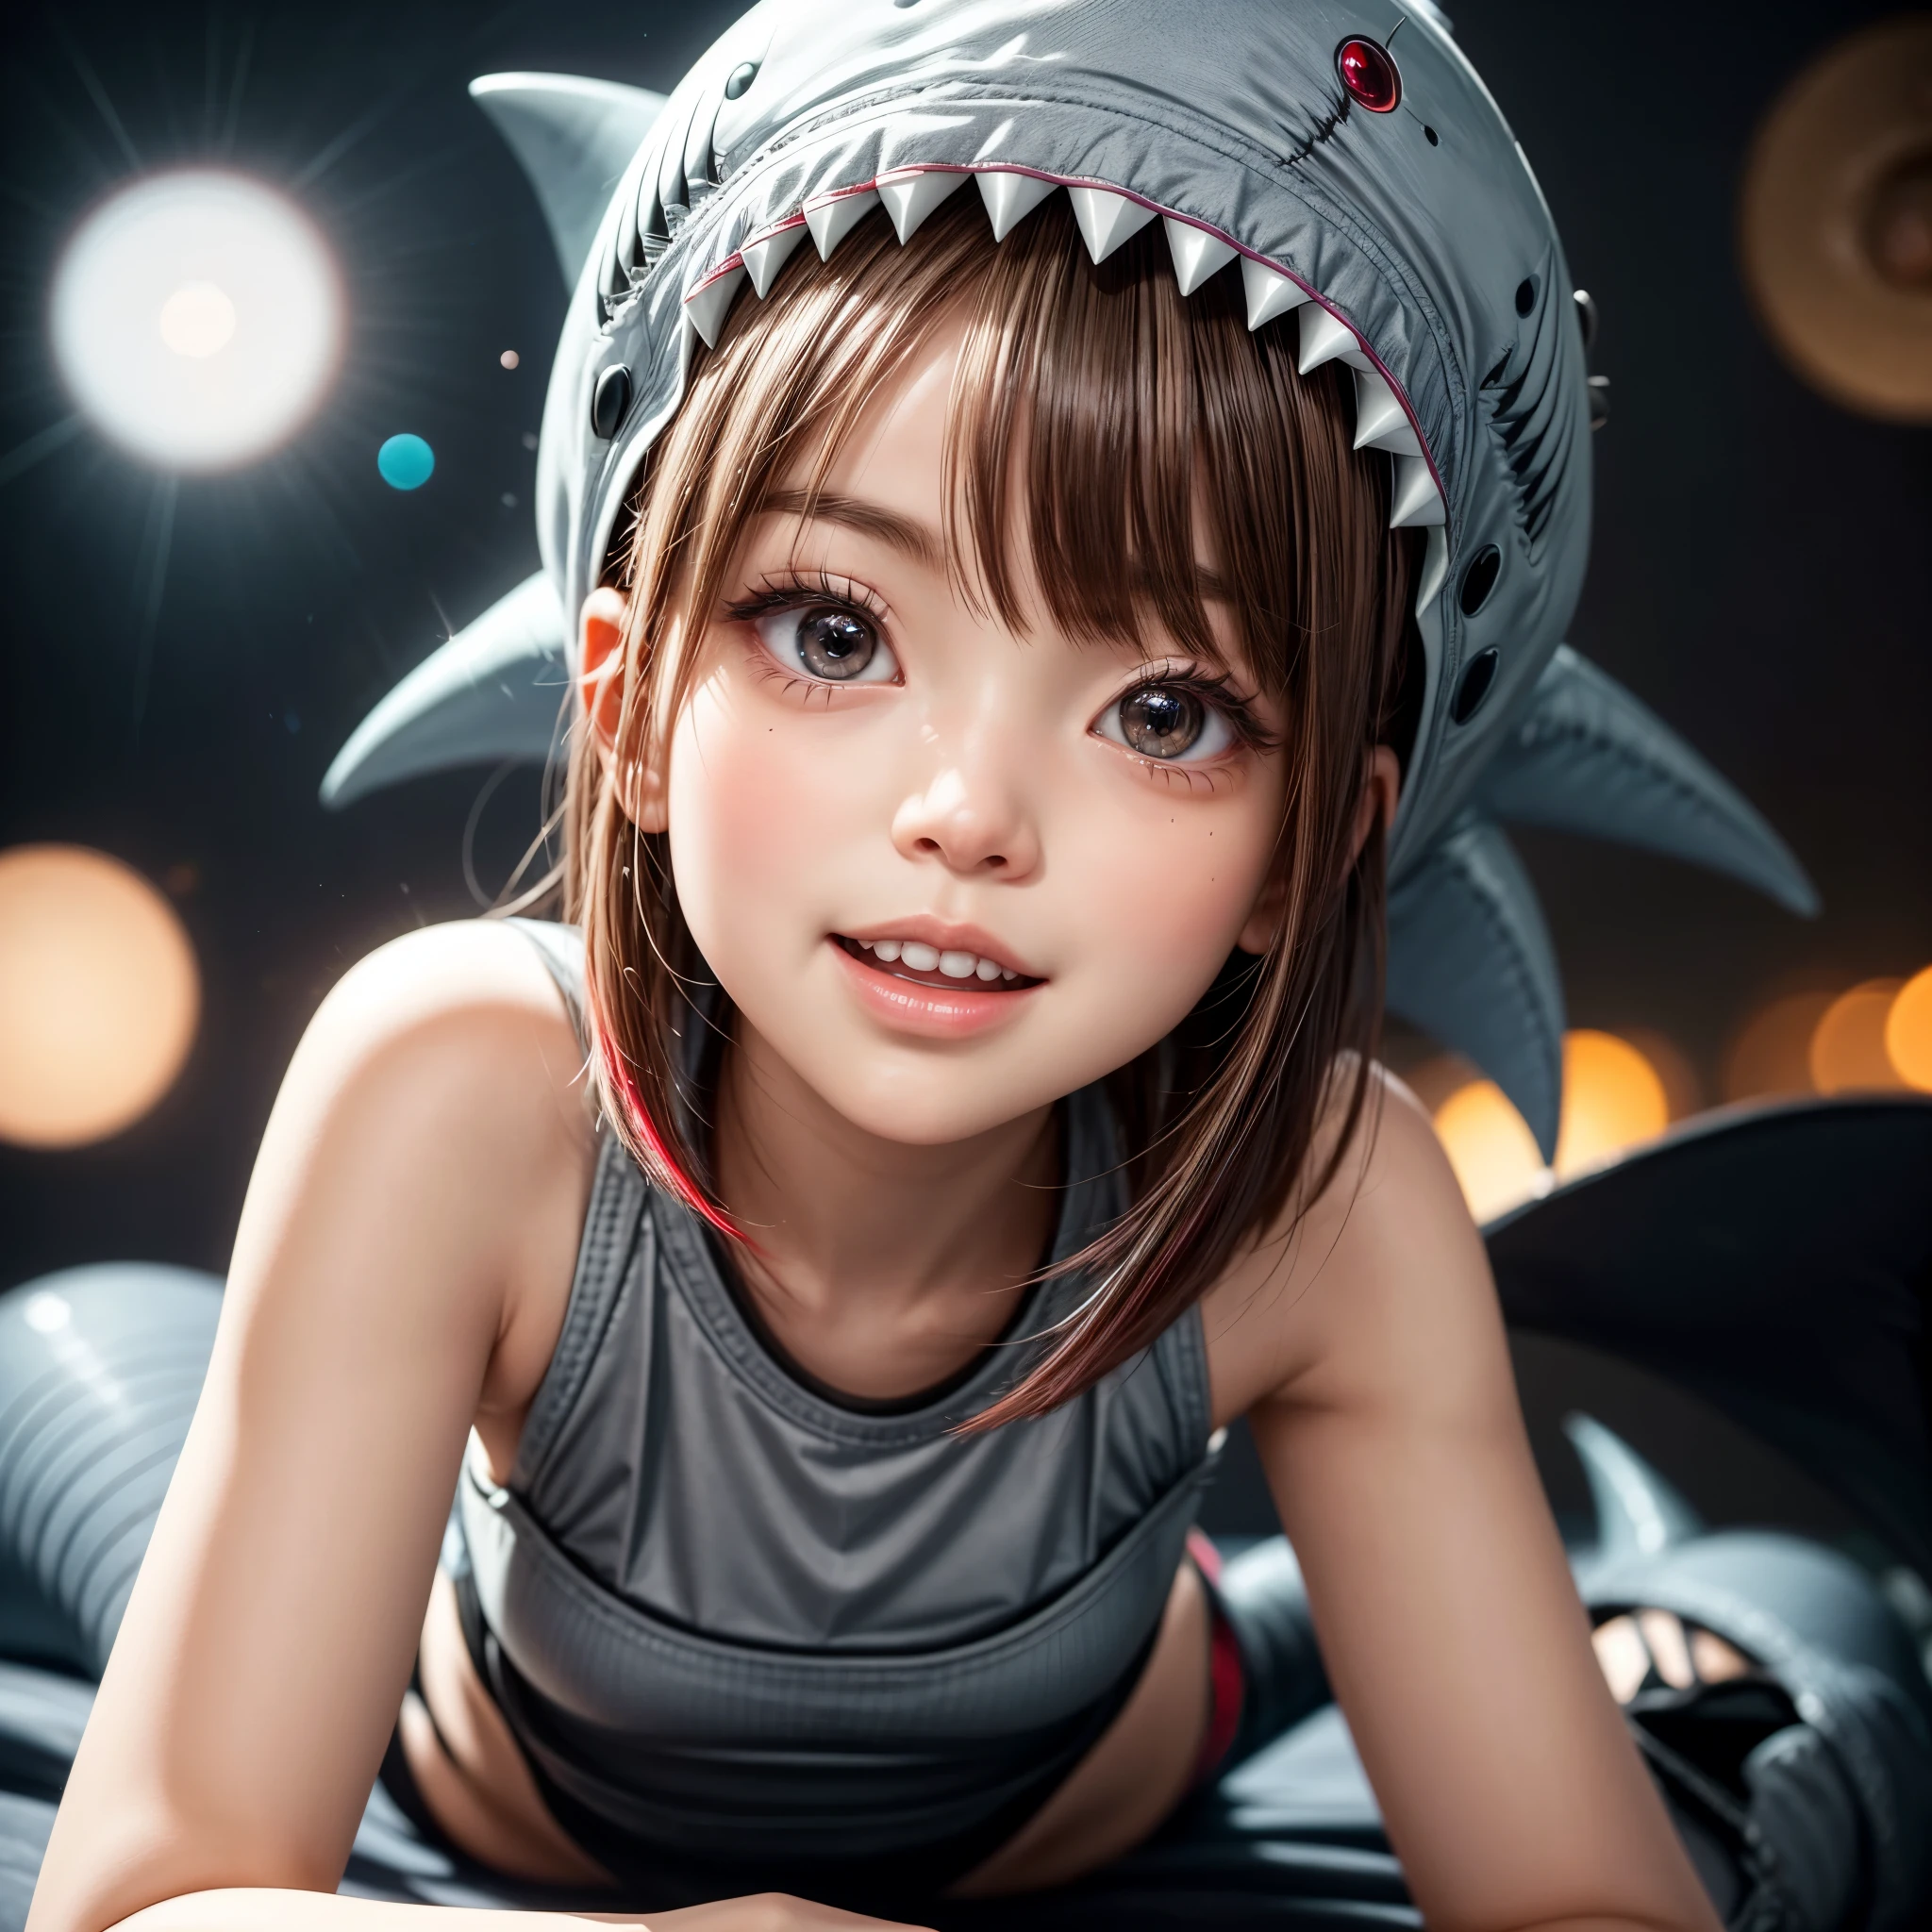  ((Skinny Shark BodySuit, (Stuffed shark head hat)with White Teeth)), 8k, High-level, absurd, masterpiece, best quality, primitive, very detailed CG, very detailed wallpaper, perfect lighting, Extremely detailed ((( personifying " Shark" as a Little Girl))), MysticSight, Tyndall effect, Tyndall scattering, (Studio gray background with (Overflowing oodles Dazzling RainbowColorParticles (BokeH))), (Blood Red short hair, RoundlyButts, Leg Fins installed), (Exposed:0.4), (Assfocus with looking ahead) BREAK  (Acutance:0.88), (NOGIZAKA face variations) Extremely Detailed very KAWAII face variations, perfect anatomy, Childish, CaptivatingGaze ElaboratePupils detailed Eyes with (sparkling highlights:1.28), (Voluminous LongEyelashes:0.88)、GlossyRED Lips with beautiful details, RosyCheeks, Radiant PearlSkin with Transparency . { (Dynamic LifeLike expressions:1.4) | (:d) }, (large eyes:-1) . ((animal ears:-1.2))